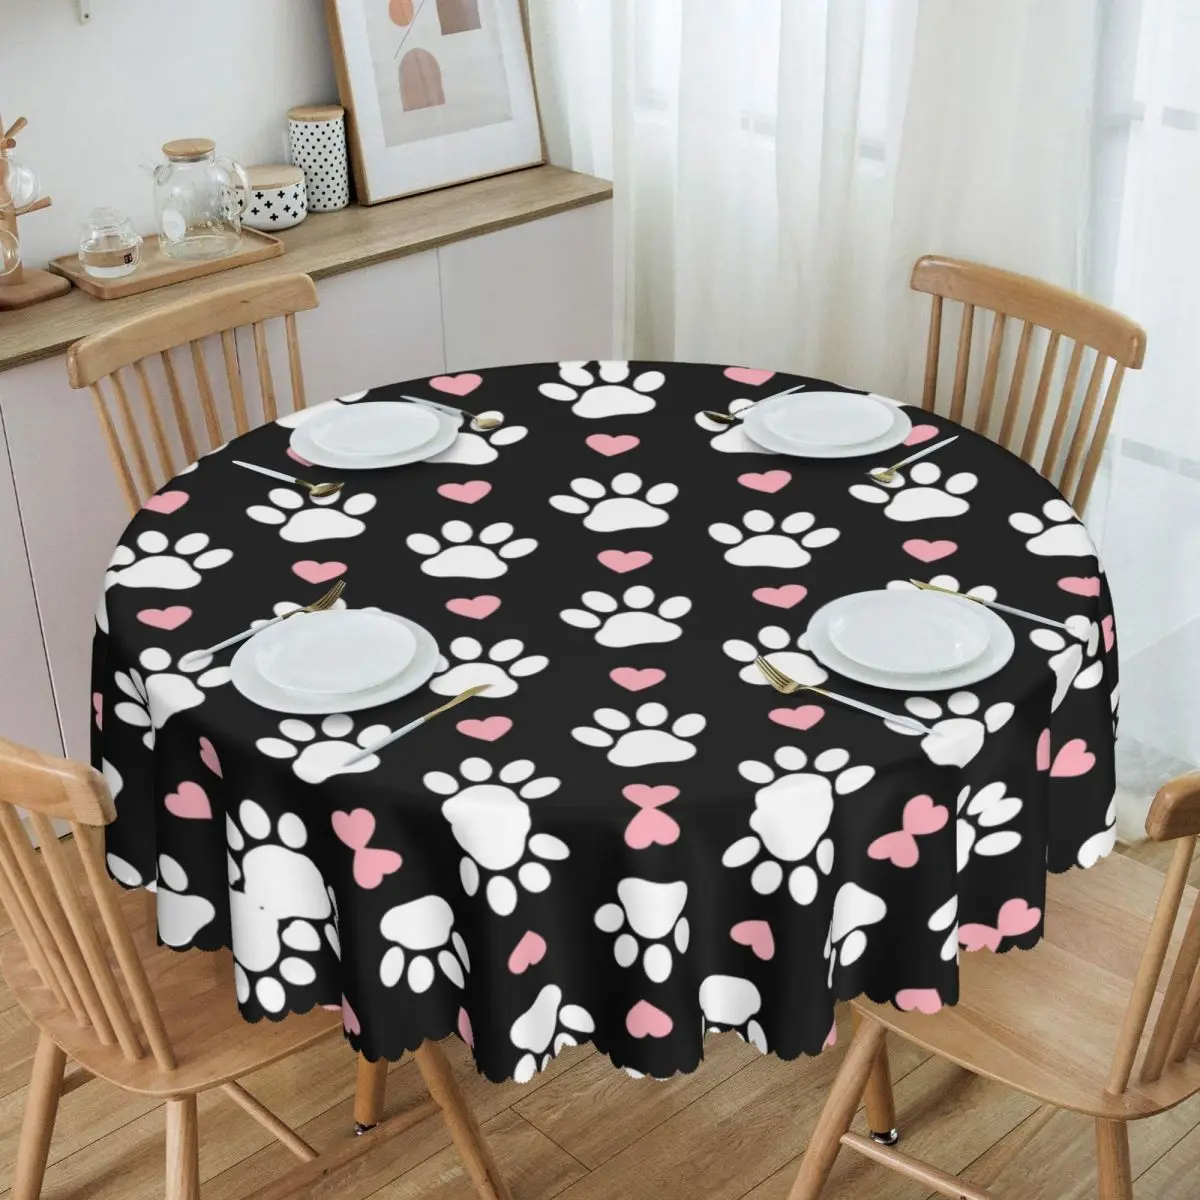 

Round Pattern Of Paws White Dog Paw Paw Tablecloth Waterproof Oil-Proof Table Covers Pretty Pink Hearts Puppy Table Cloth